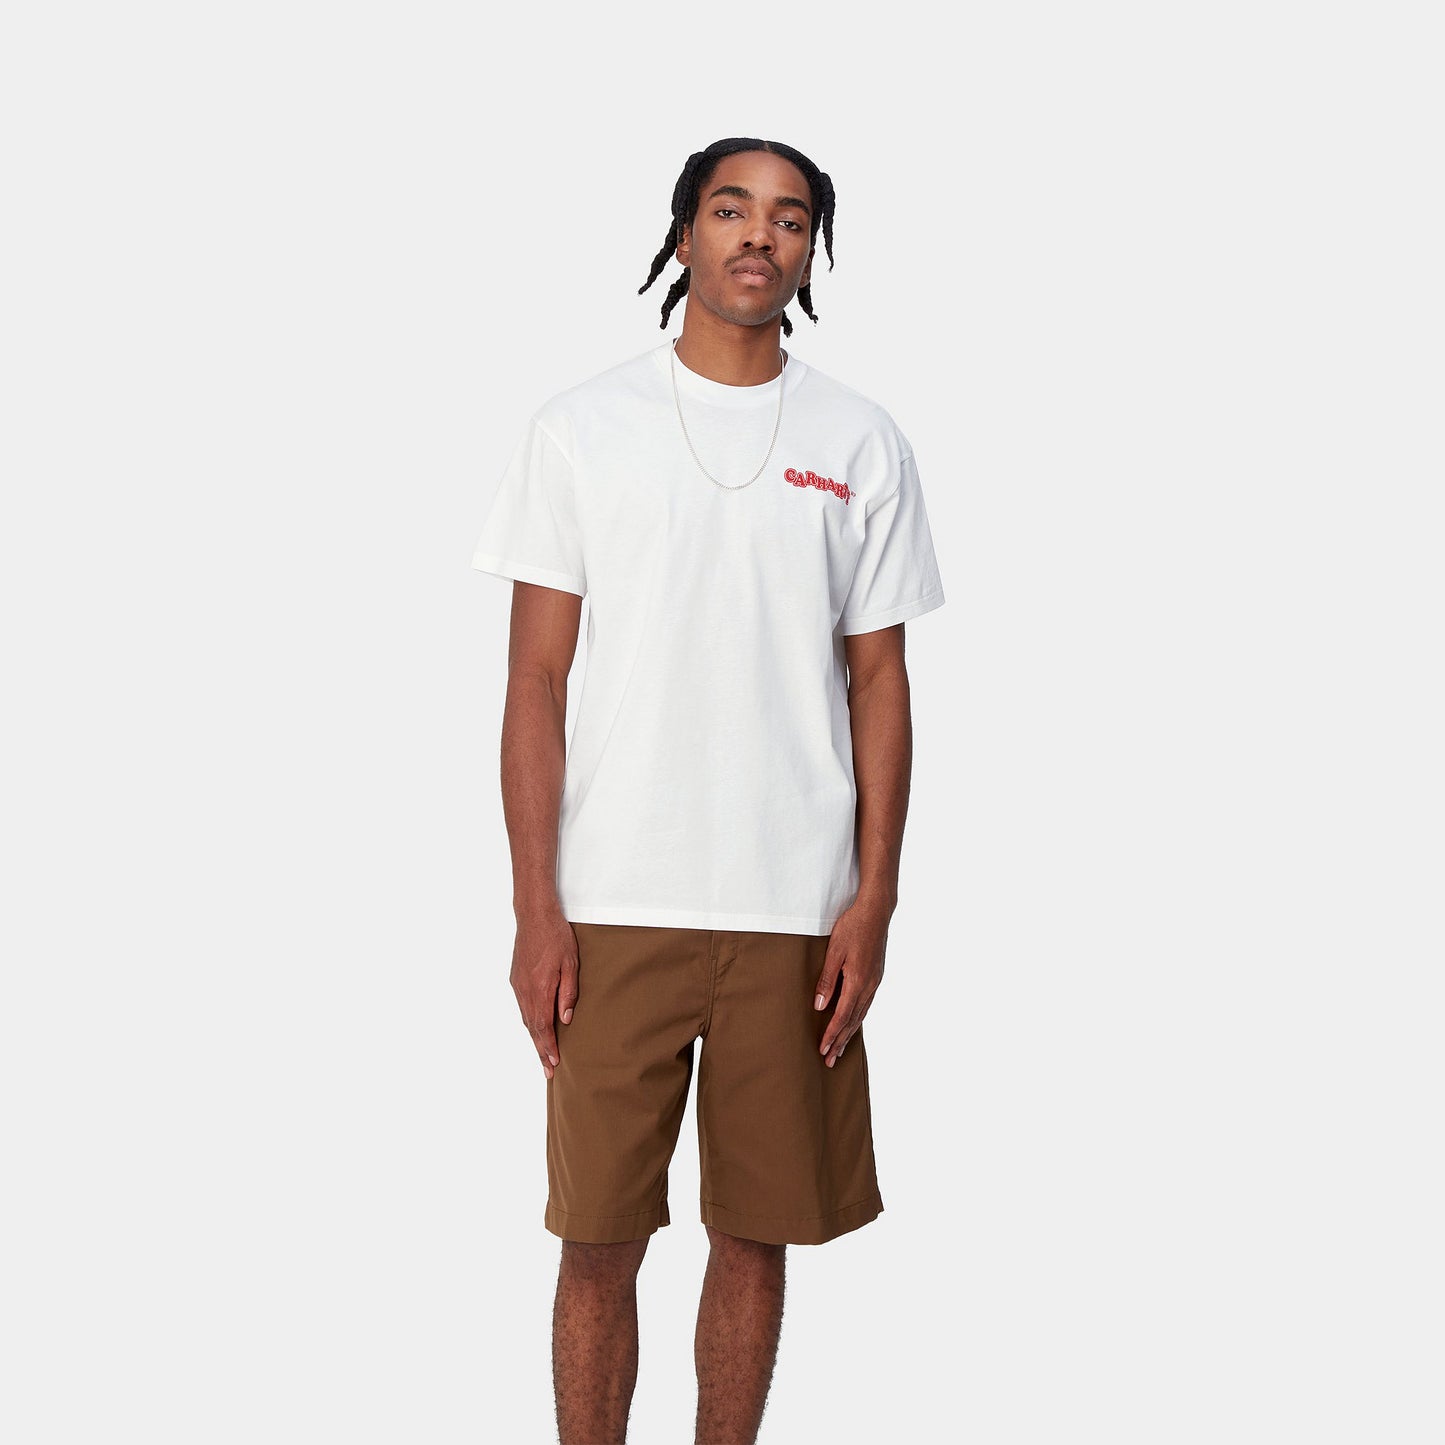 CARHARTT WIP S/S FAST FOOD T-Shirt - White Red